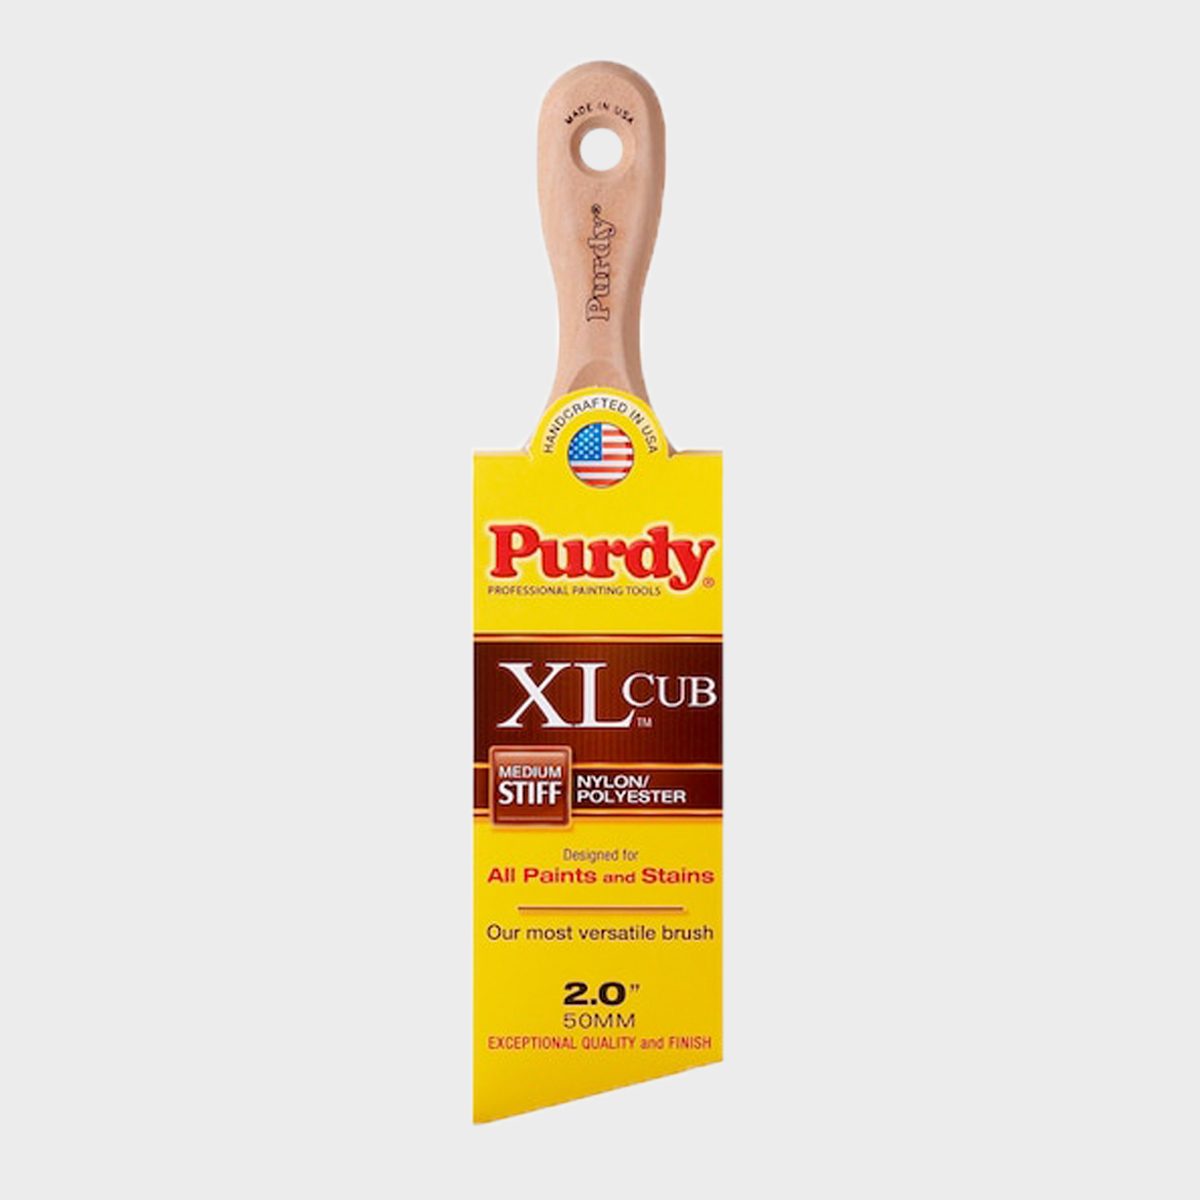 Purdy Xl Cub 2 In Angle Trim Brush Nylon Polyester Blend Paint Brush Ecomm Lowes.com